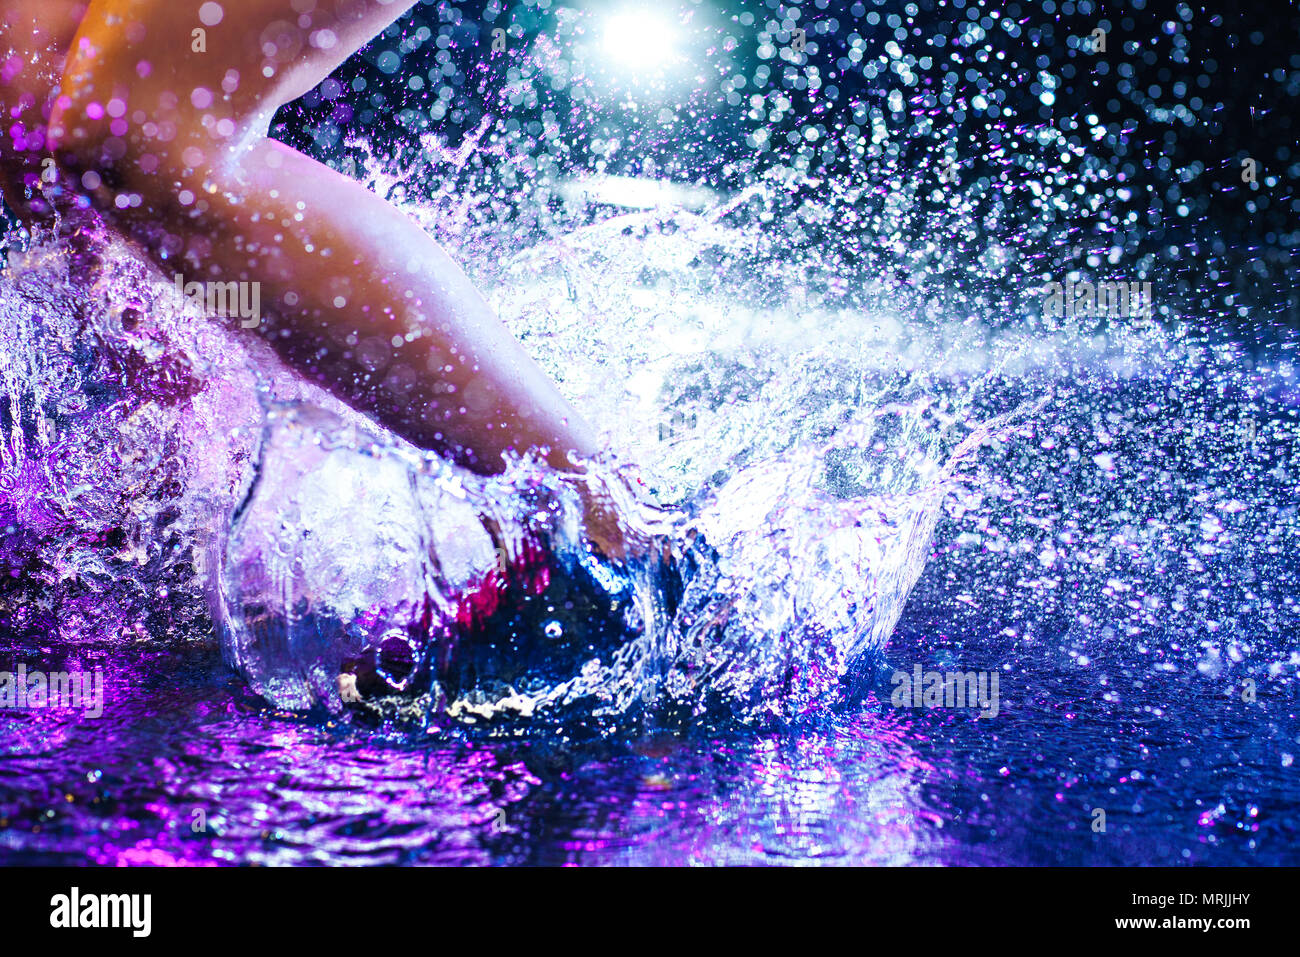 Woman jumping on water with big splashes. Legs and shoes close-up. Studio with rain and drops interior. Stock Photo